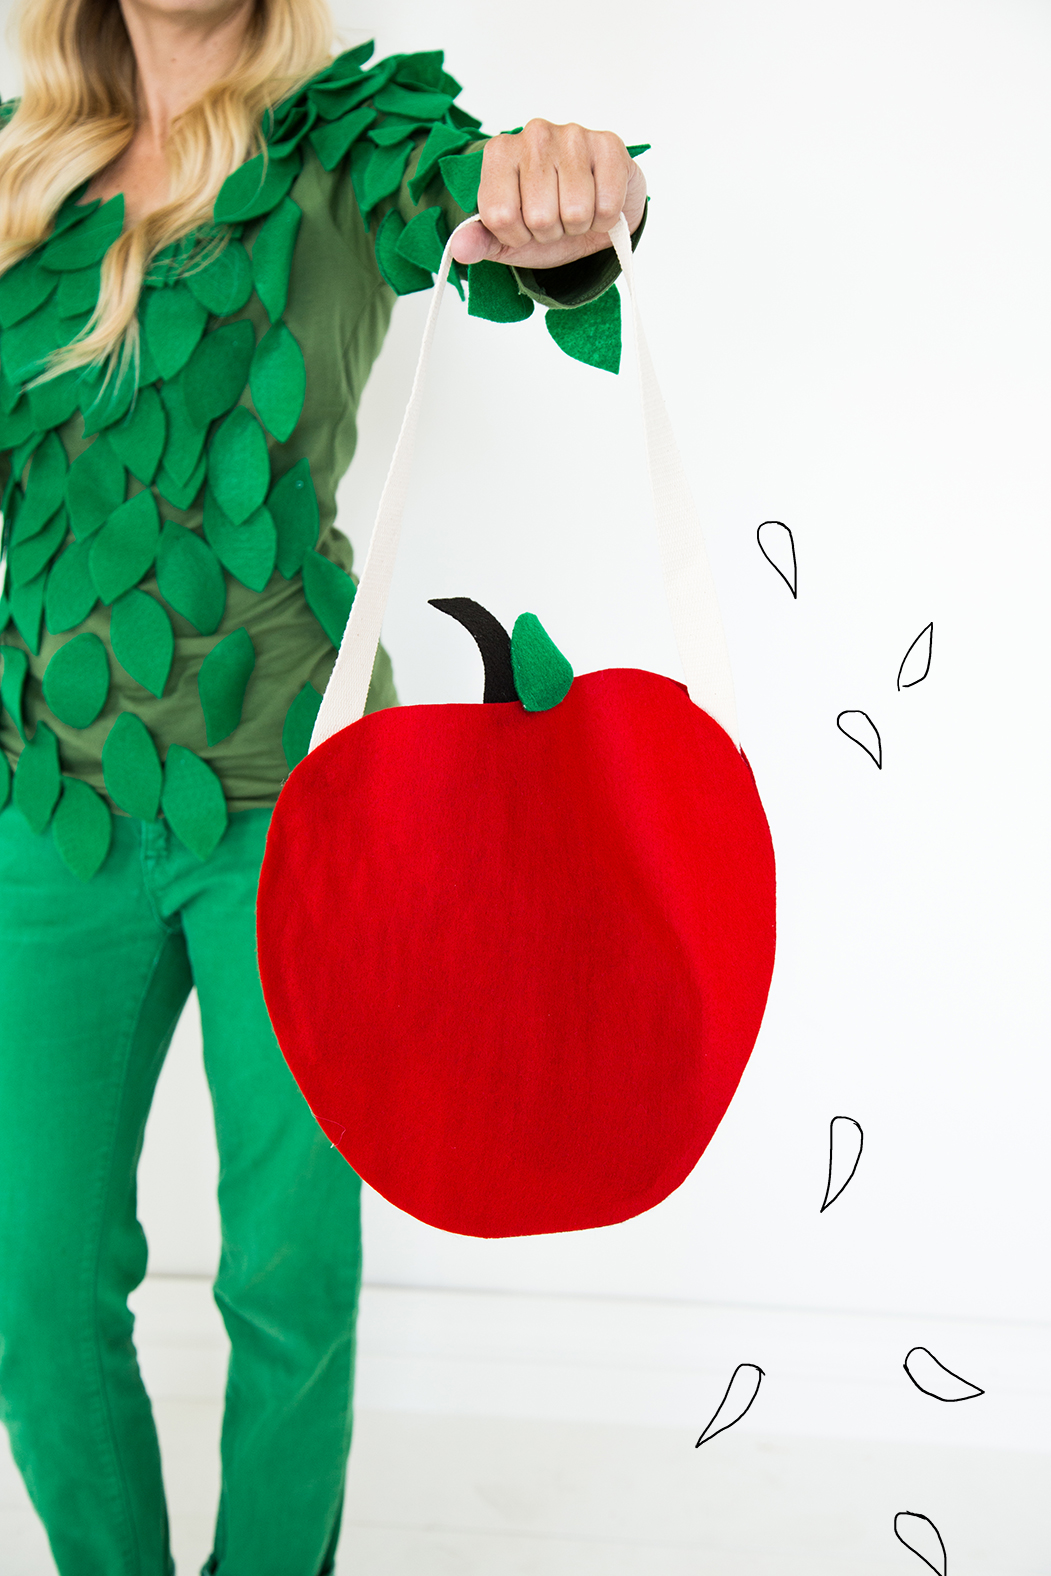 The Giving Tree Halloween costumes for parent and child along with a coordinating trick-or-treat bag